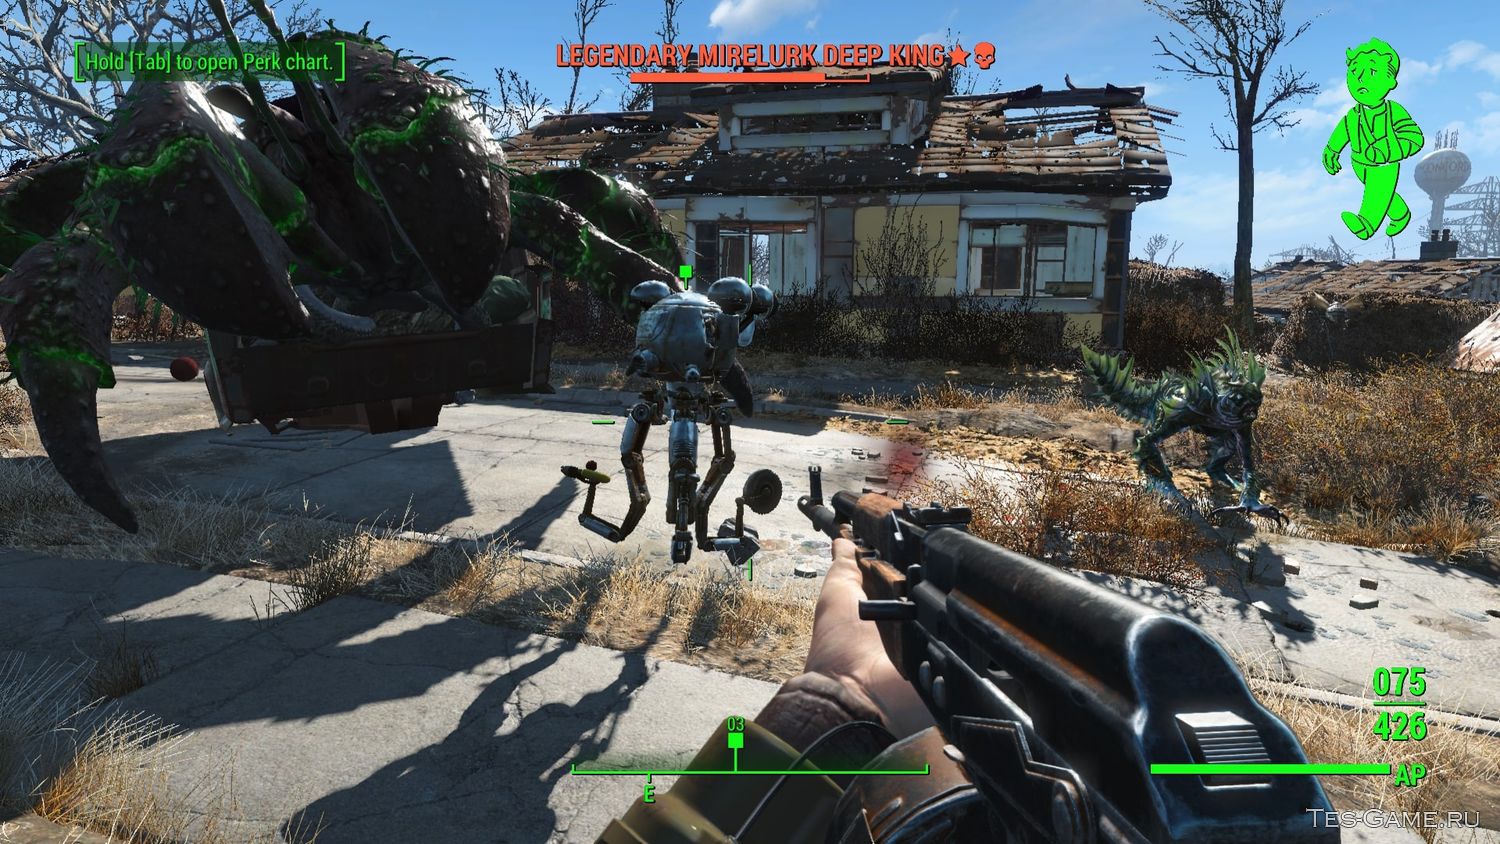 Legendary enemy spawning fallout 4 фото 85